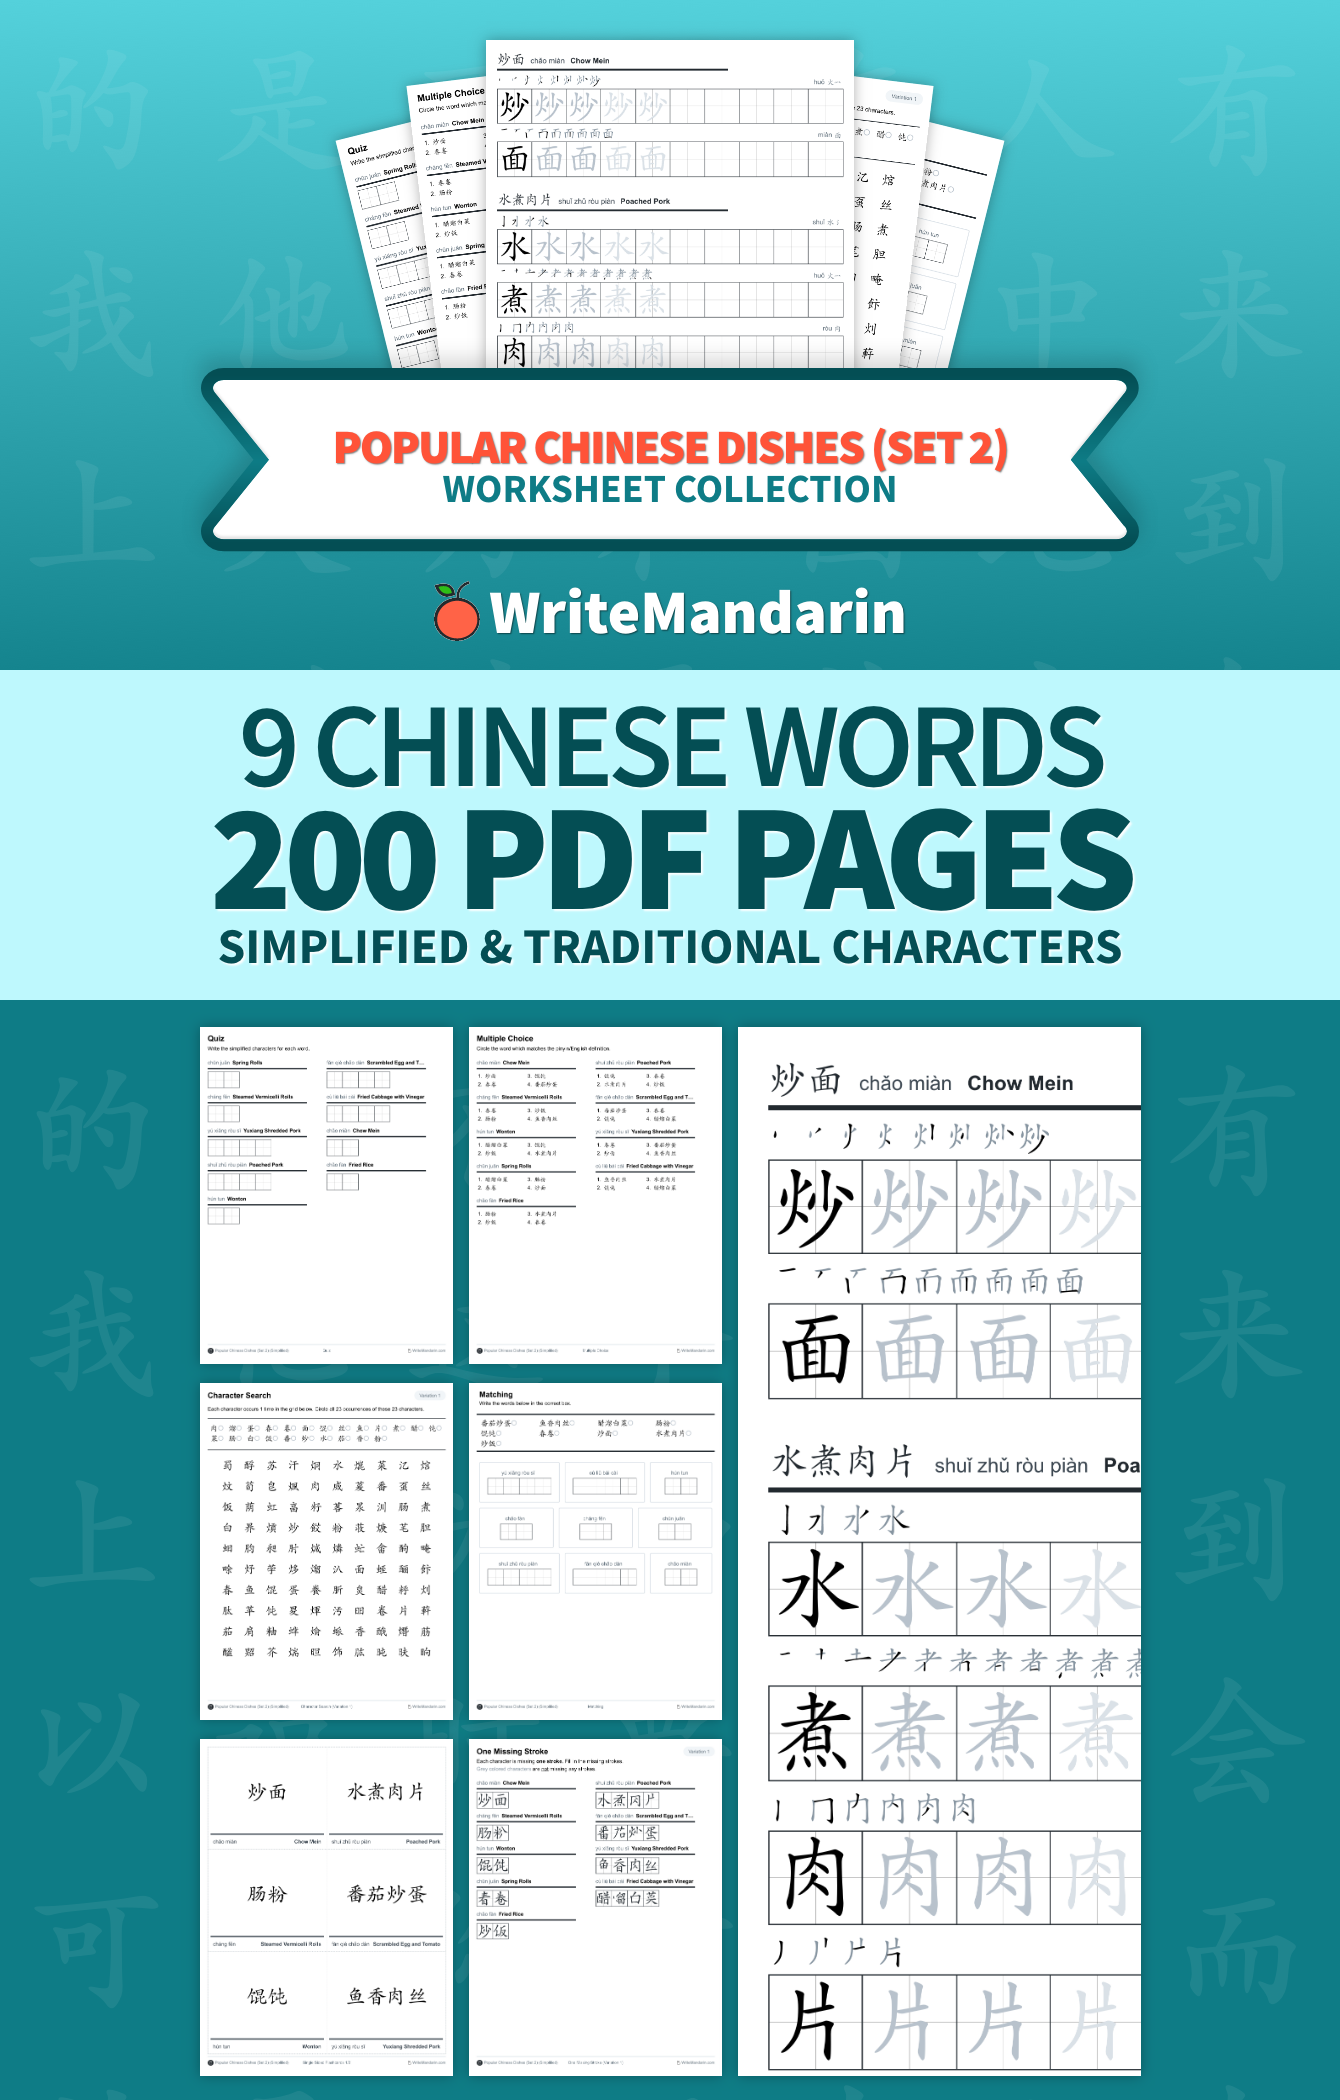 Preview image of Popular Chinese Dishes (Set 2) worksheet collection